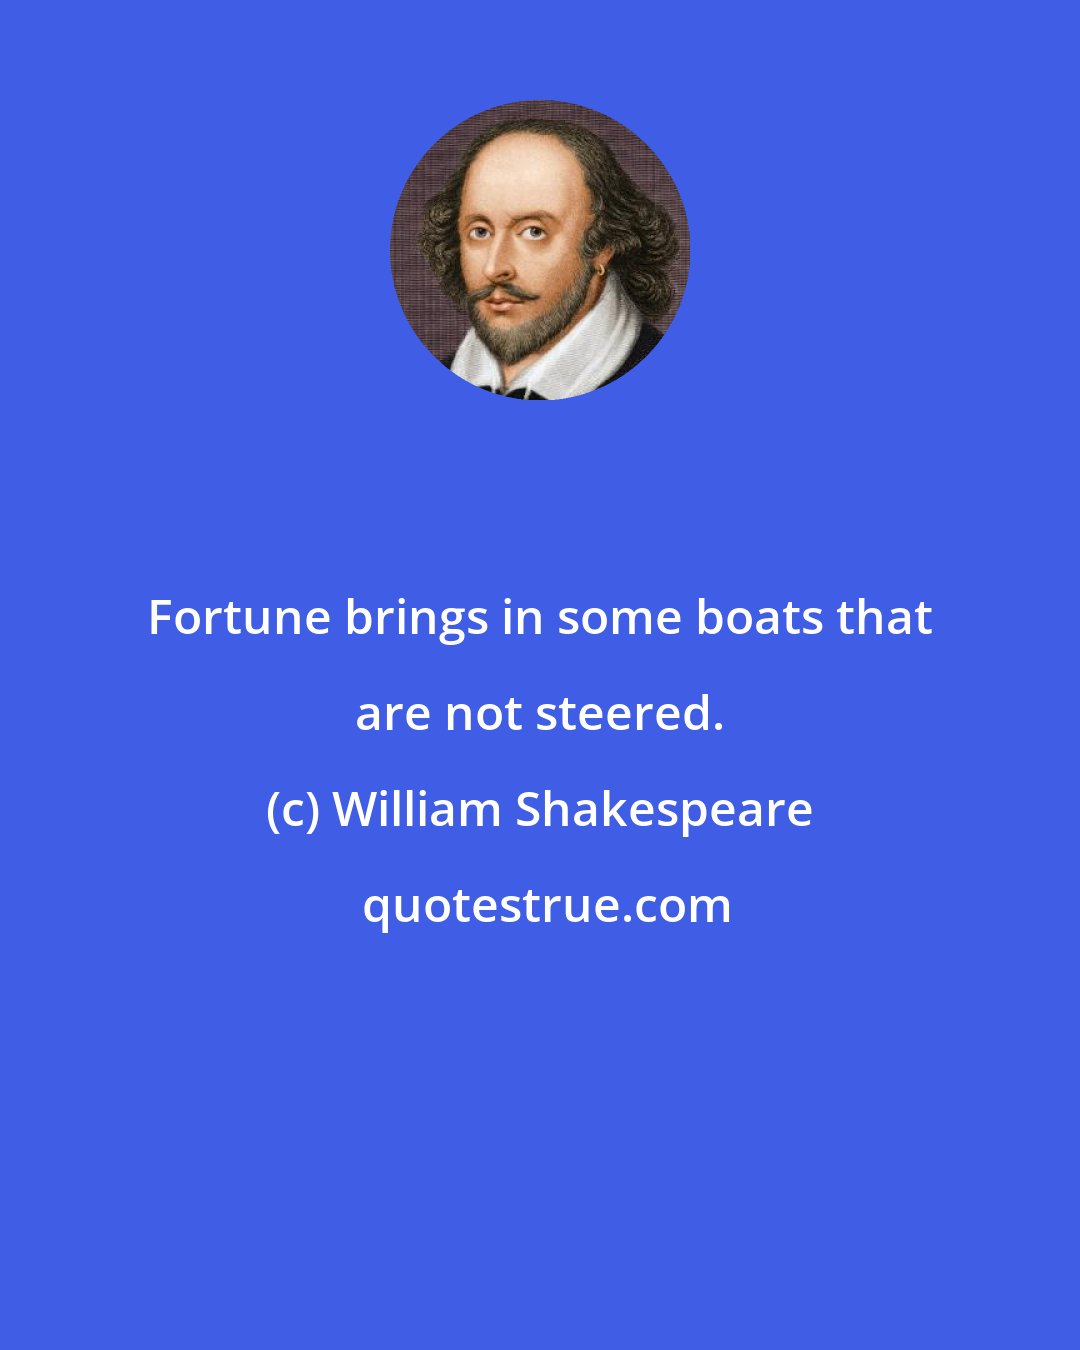 William Shakespeare: Fortune brings in some boats that are not steered.